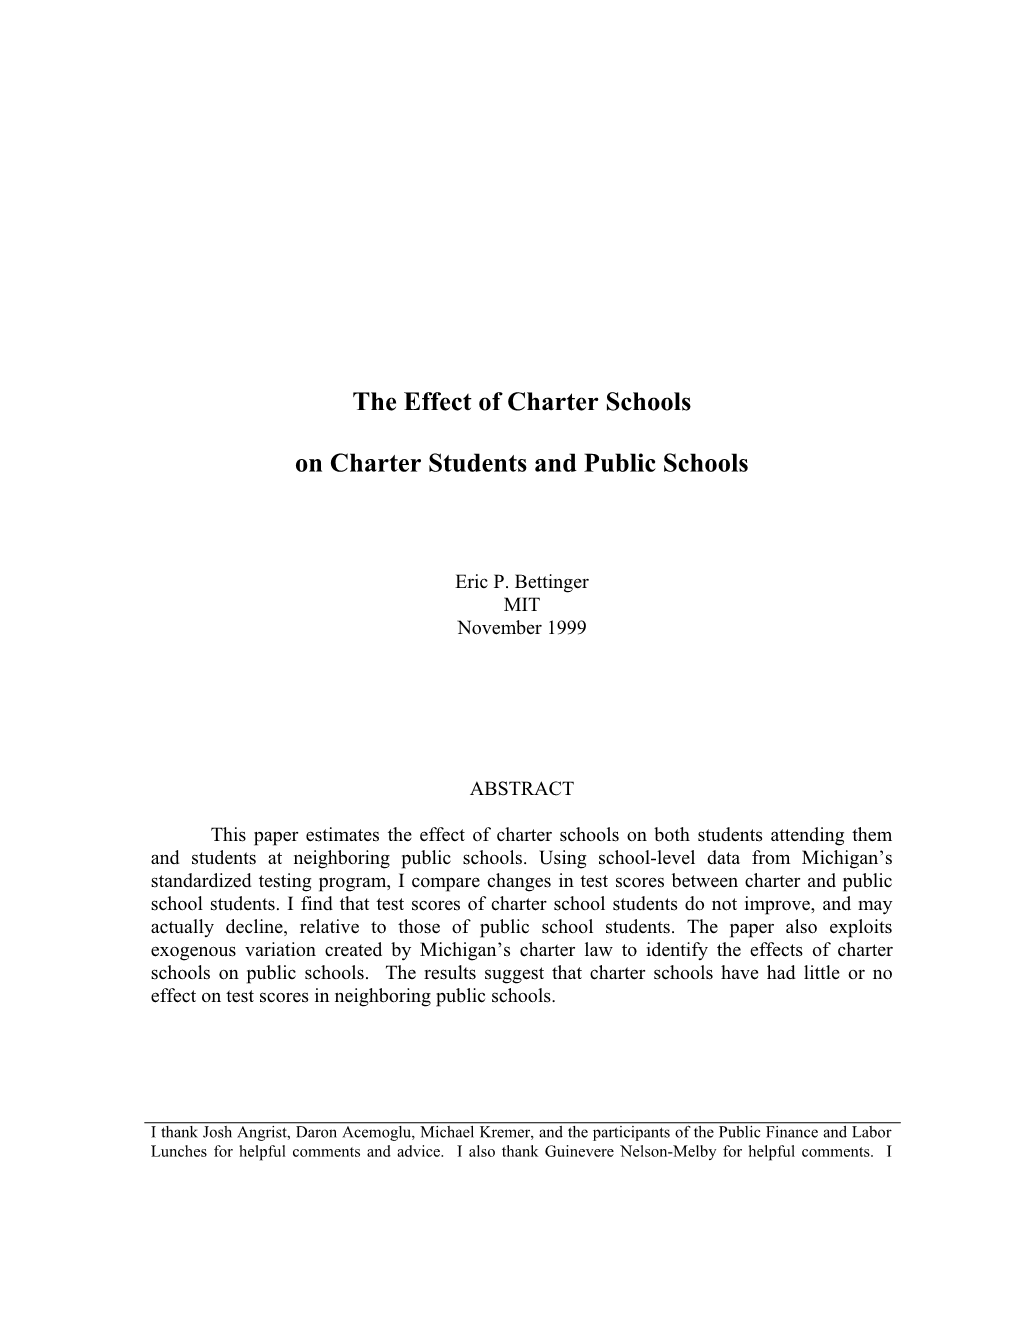 The Effect of Charter Schools